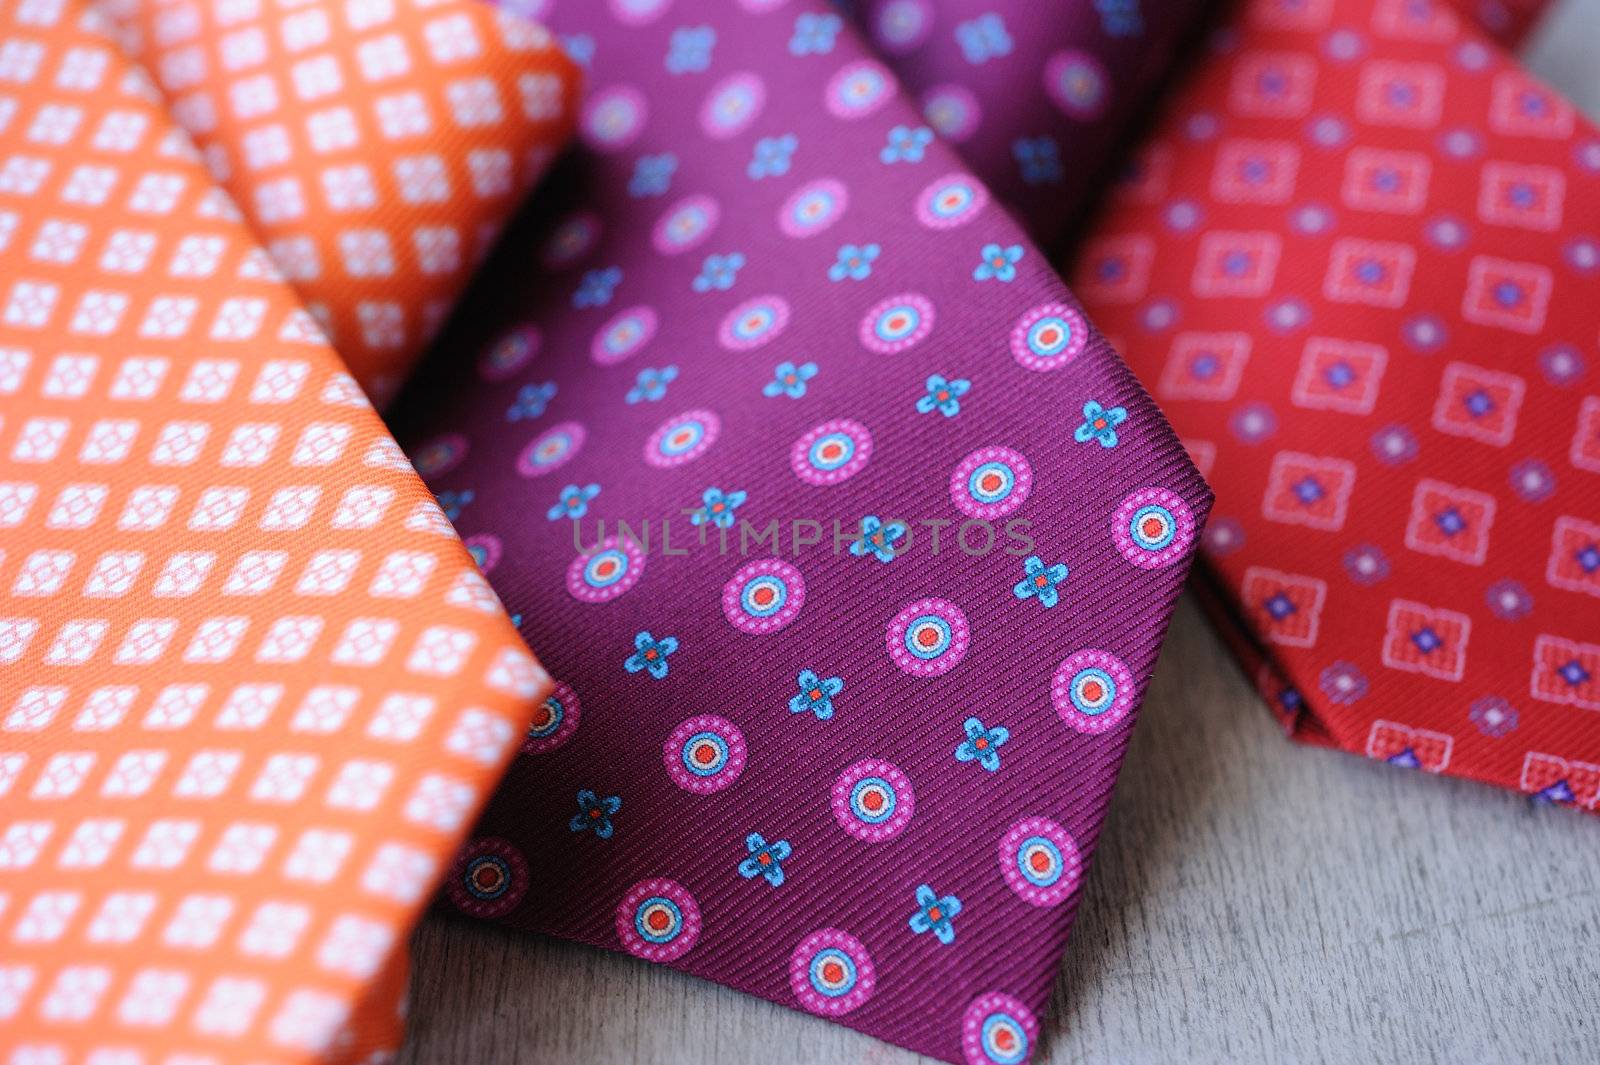 Image of 3 ties on white wood background